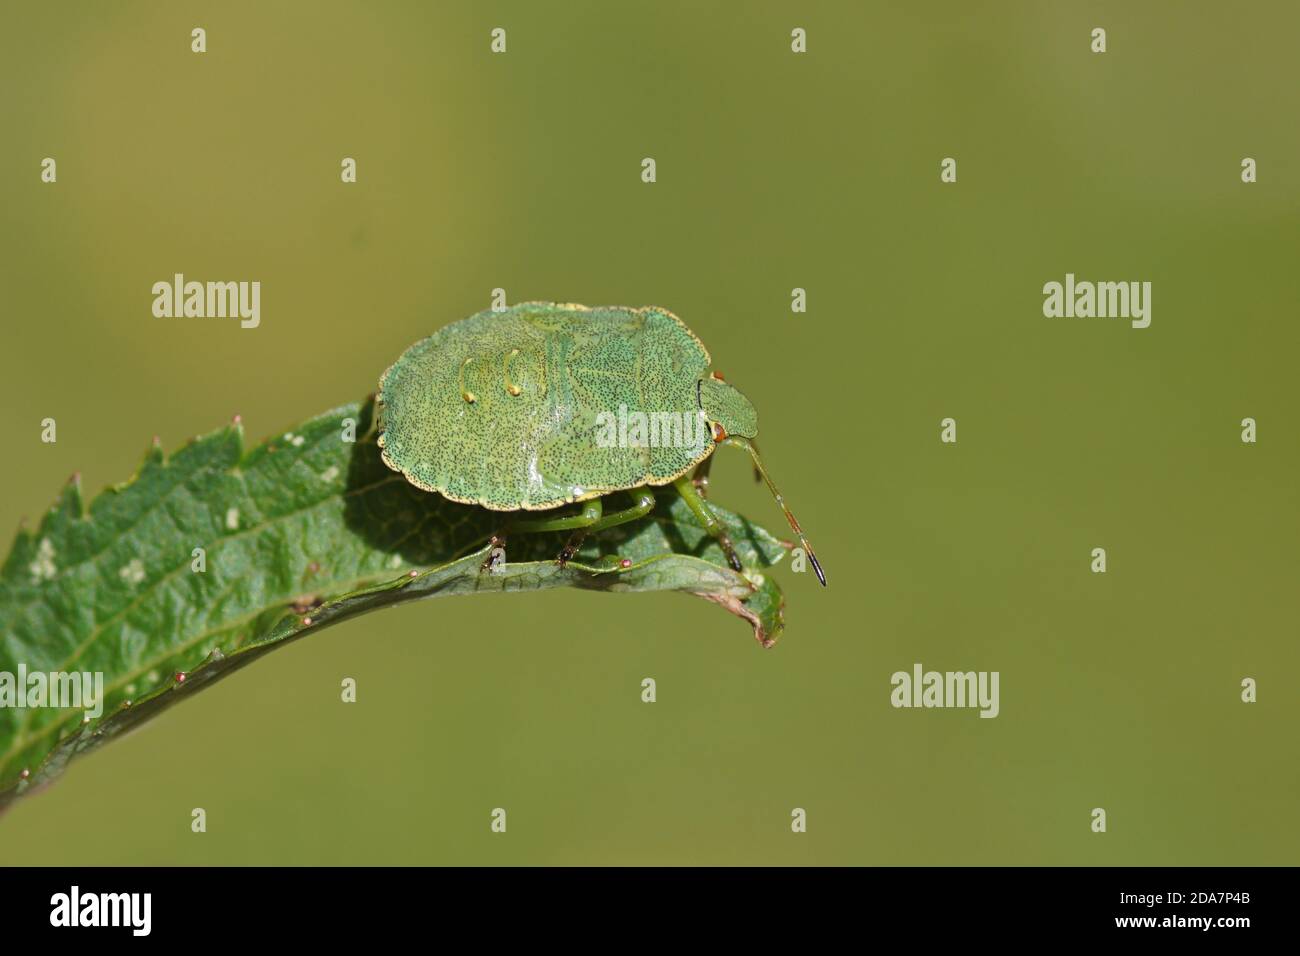 Nymph of a green shield bug (Palomena prasina) of the family Pentatomidae on a leaf. Summer in a Dutch garden. Netherlands July Stock Photo